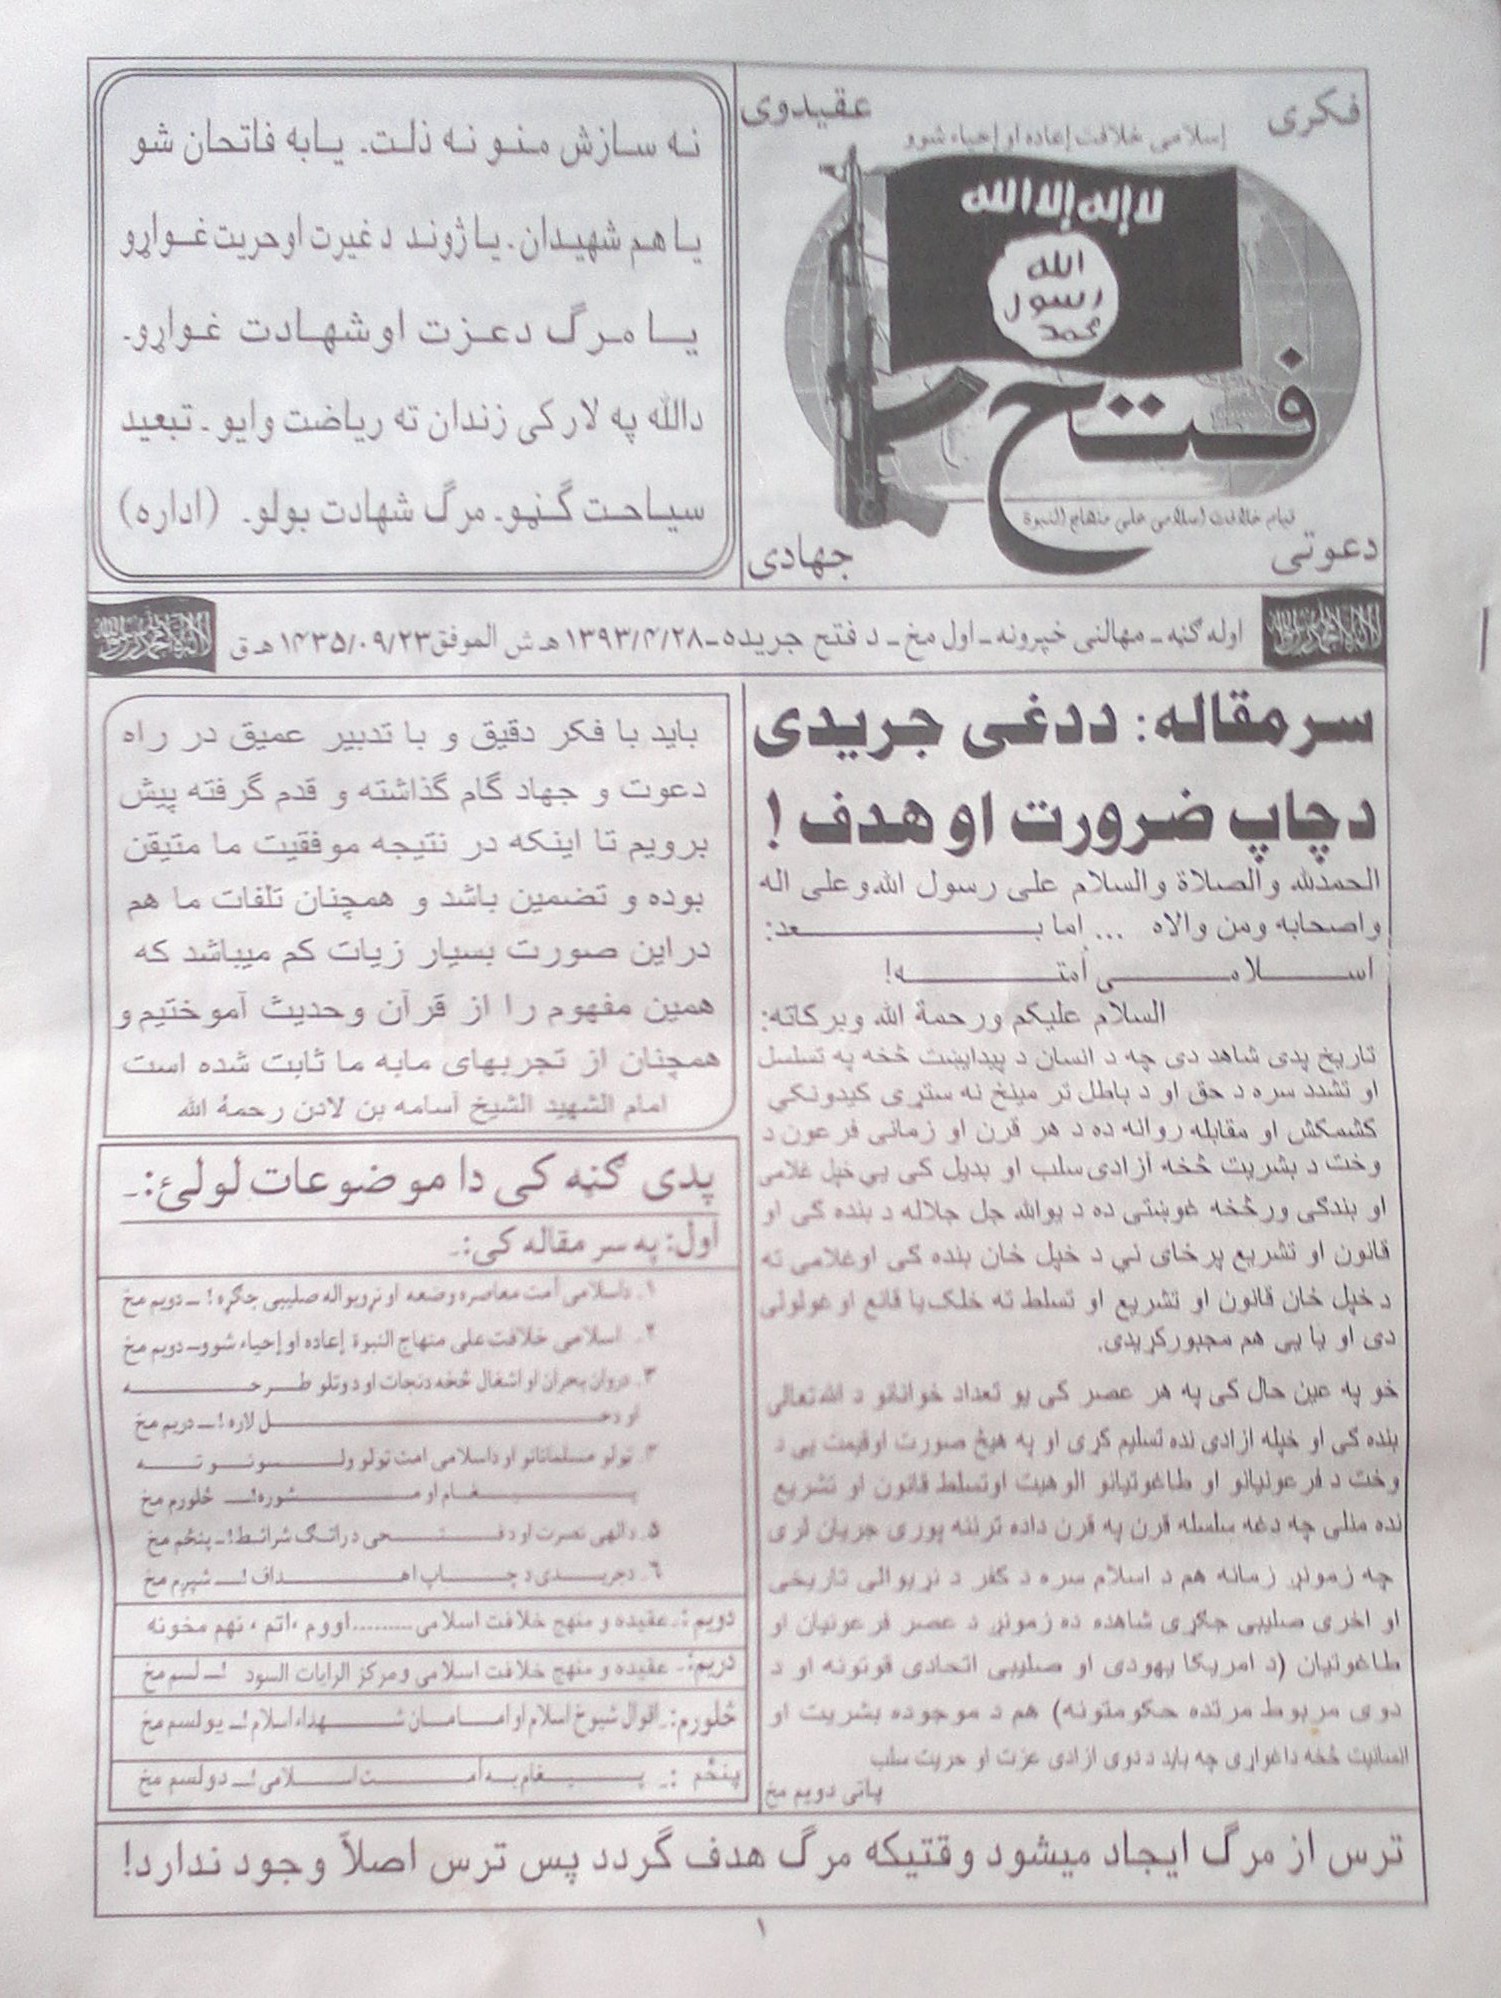 A pamphlet entitled "Fateh" (victory) used to encourage militants to join and support IS (photo: Kiran Nazish)